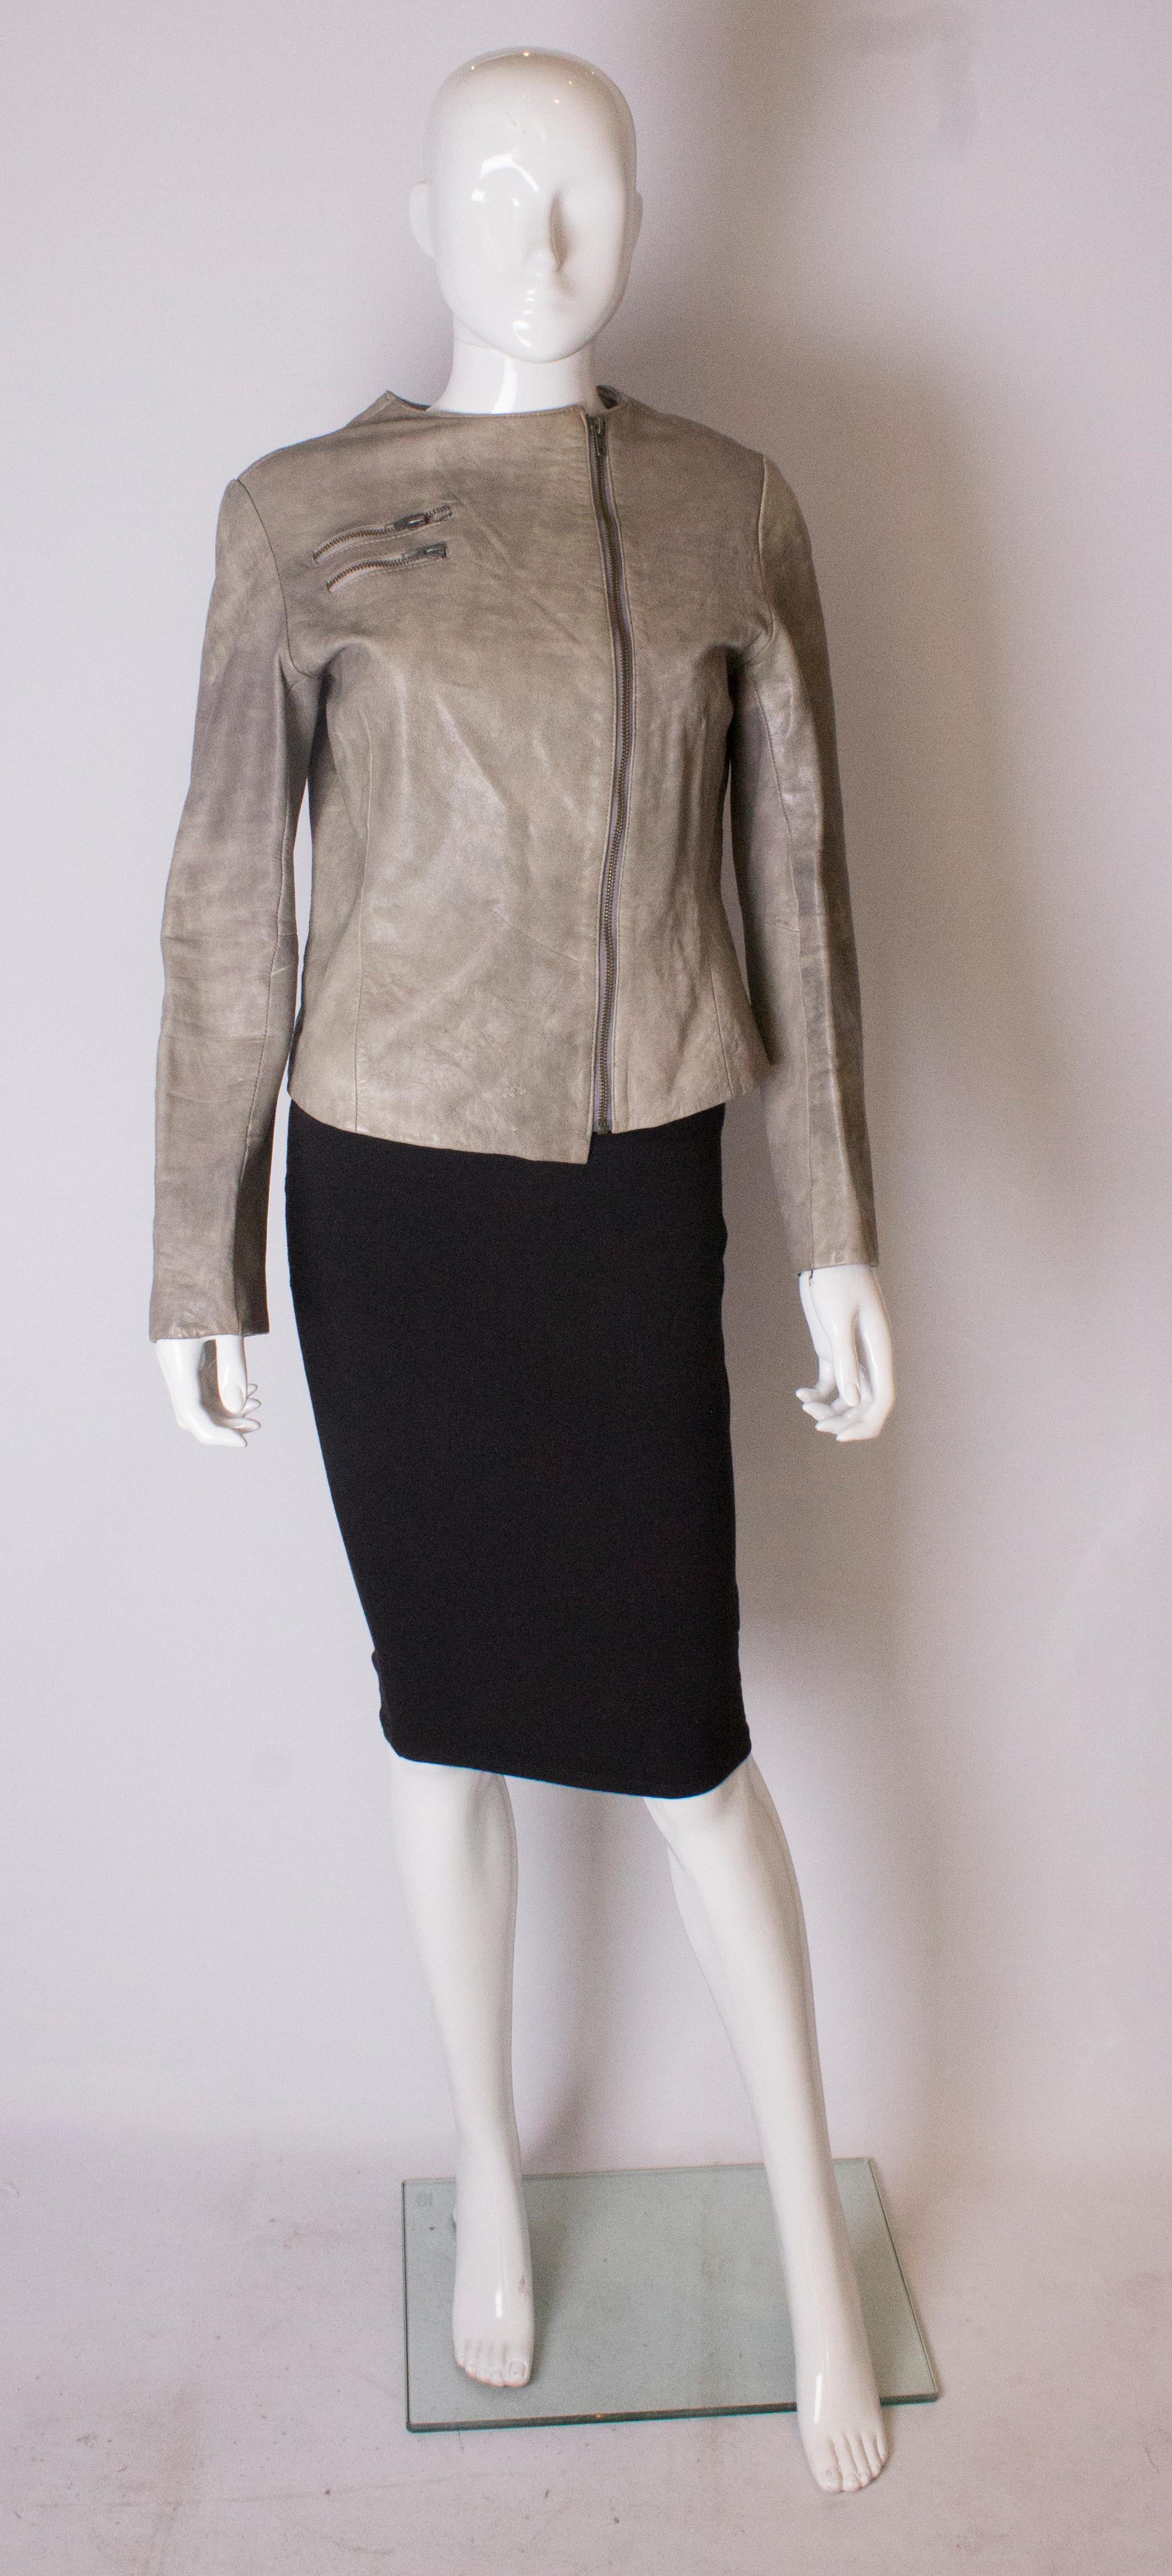 A great jacket for fall. In a soft grey colour, this jacket has a round neckline, zip opening and two zip pockets on the front. It is fully lined.